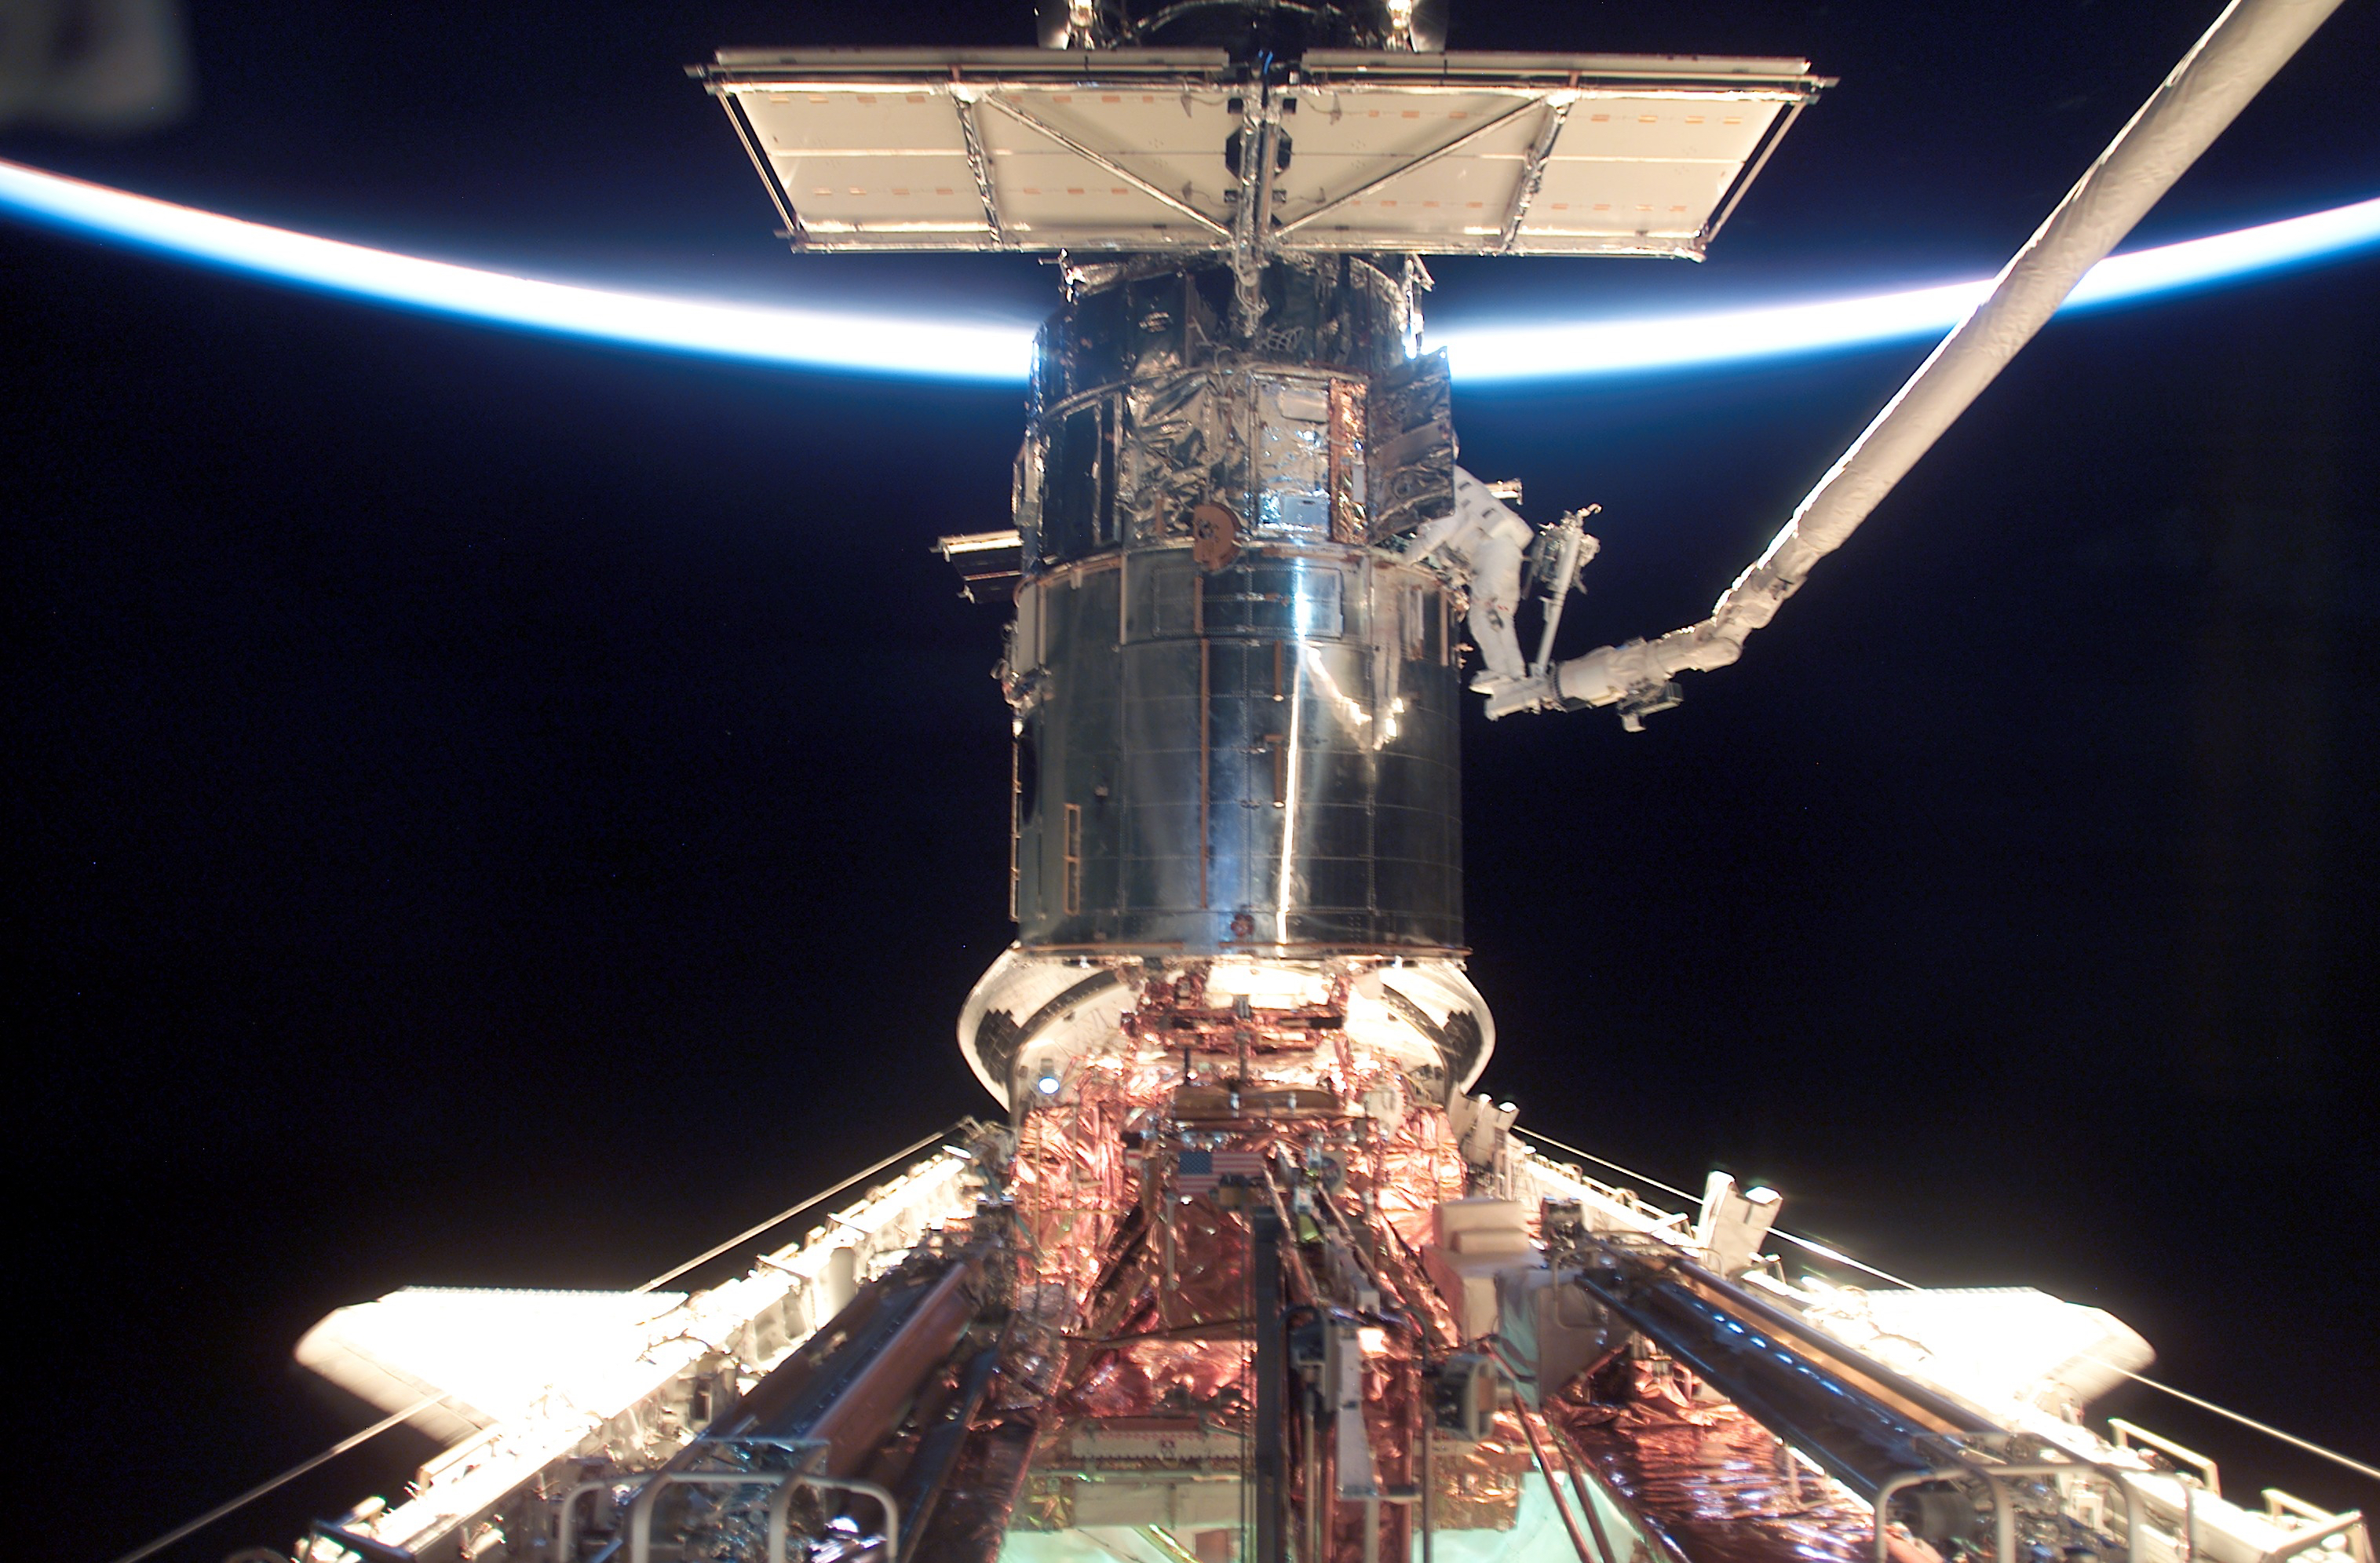 The brightly lit limb of the Earth crosses the top of the image, while the rest of the Earth is dark. The space shuttle is at the bottom of the image with the cargo bay open. Hubble is perpendicular to the shuttle. An astronaut is on the robotic CANADARM to the right of Hubble.